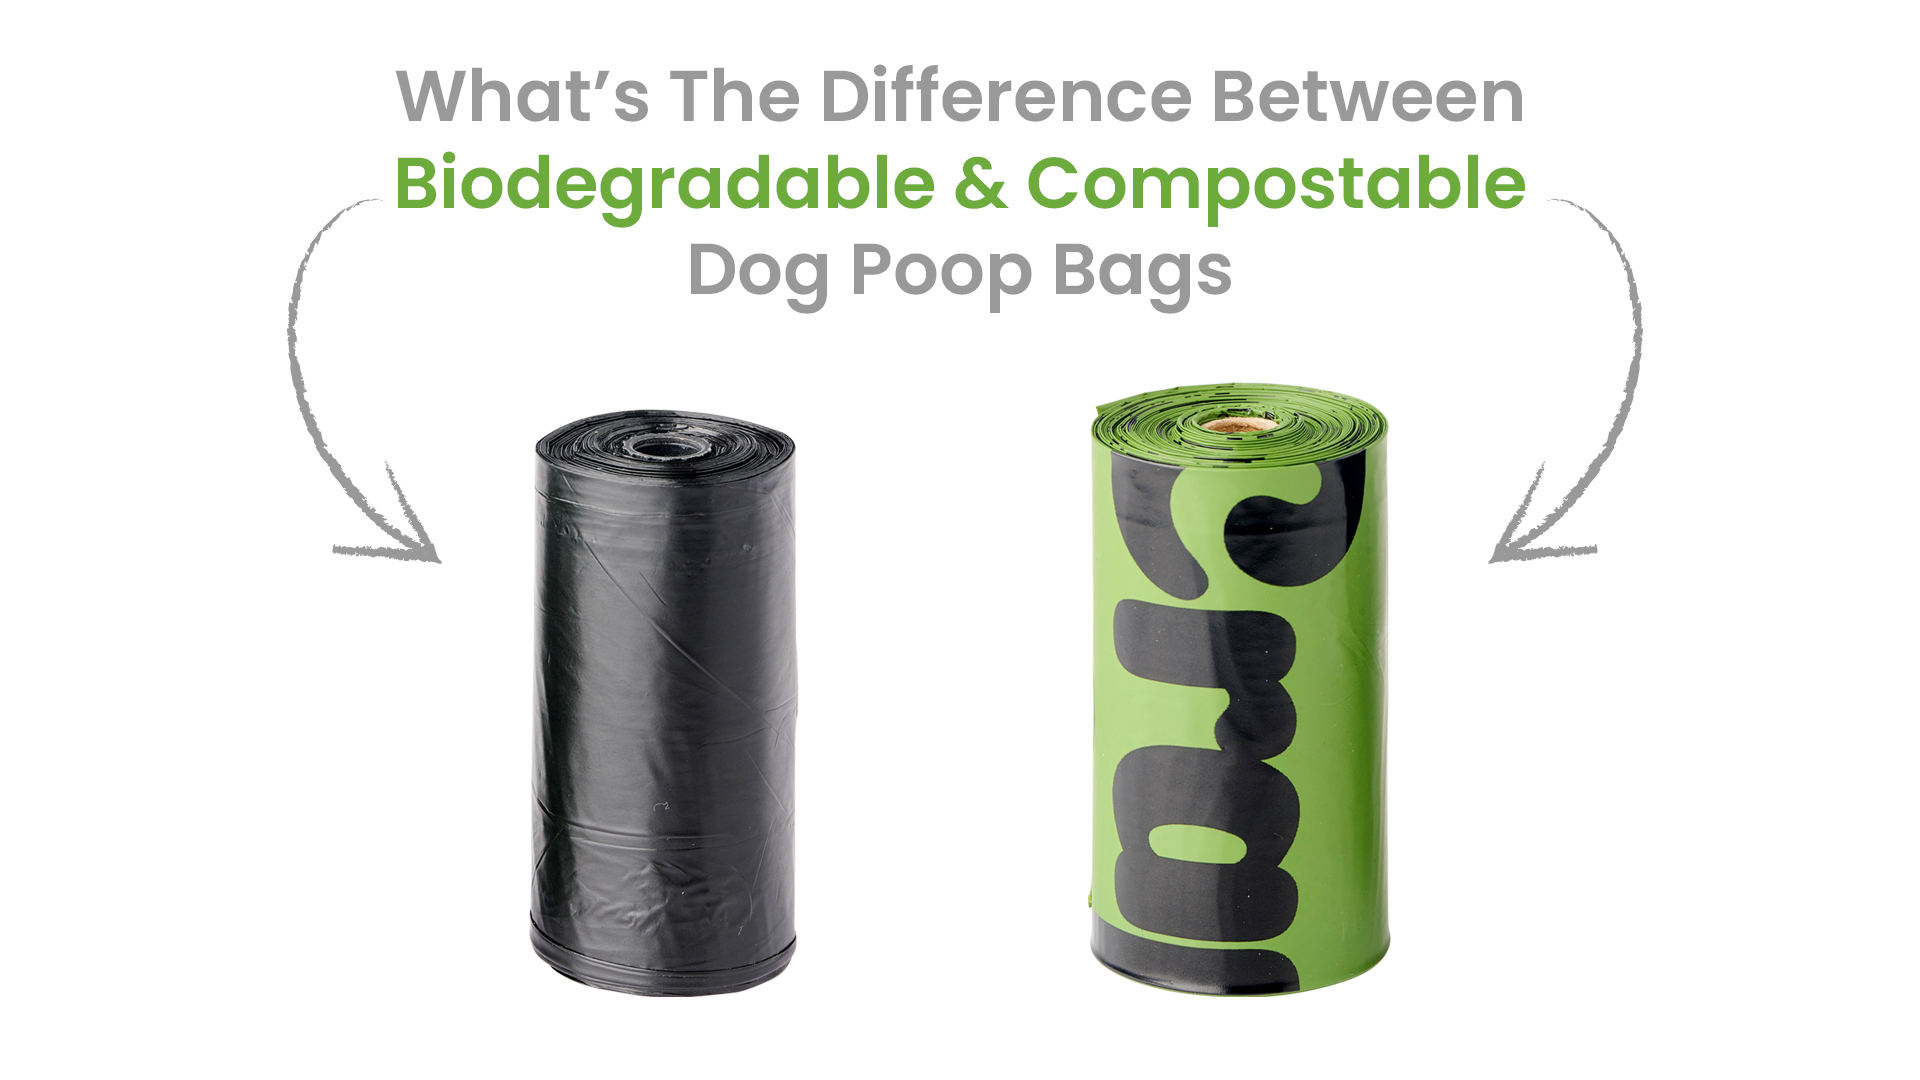 Image with a picture of two dog poop bag rolls that says Biodegradable vs Compostable Dog Poop Bags